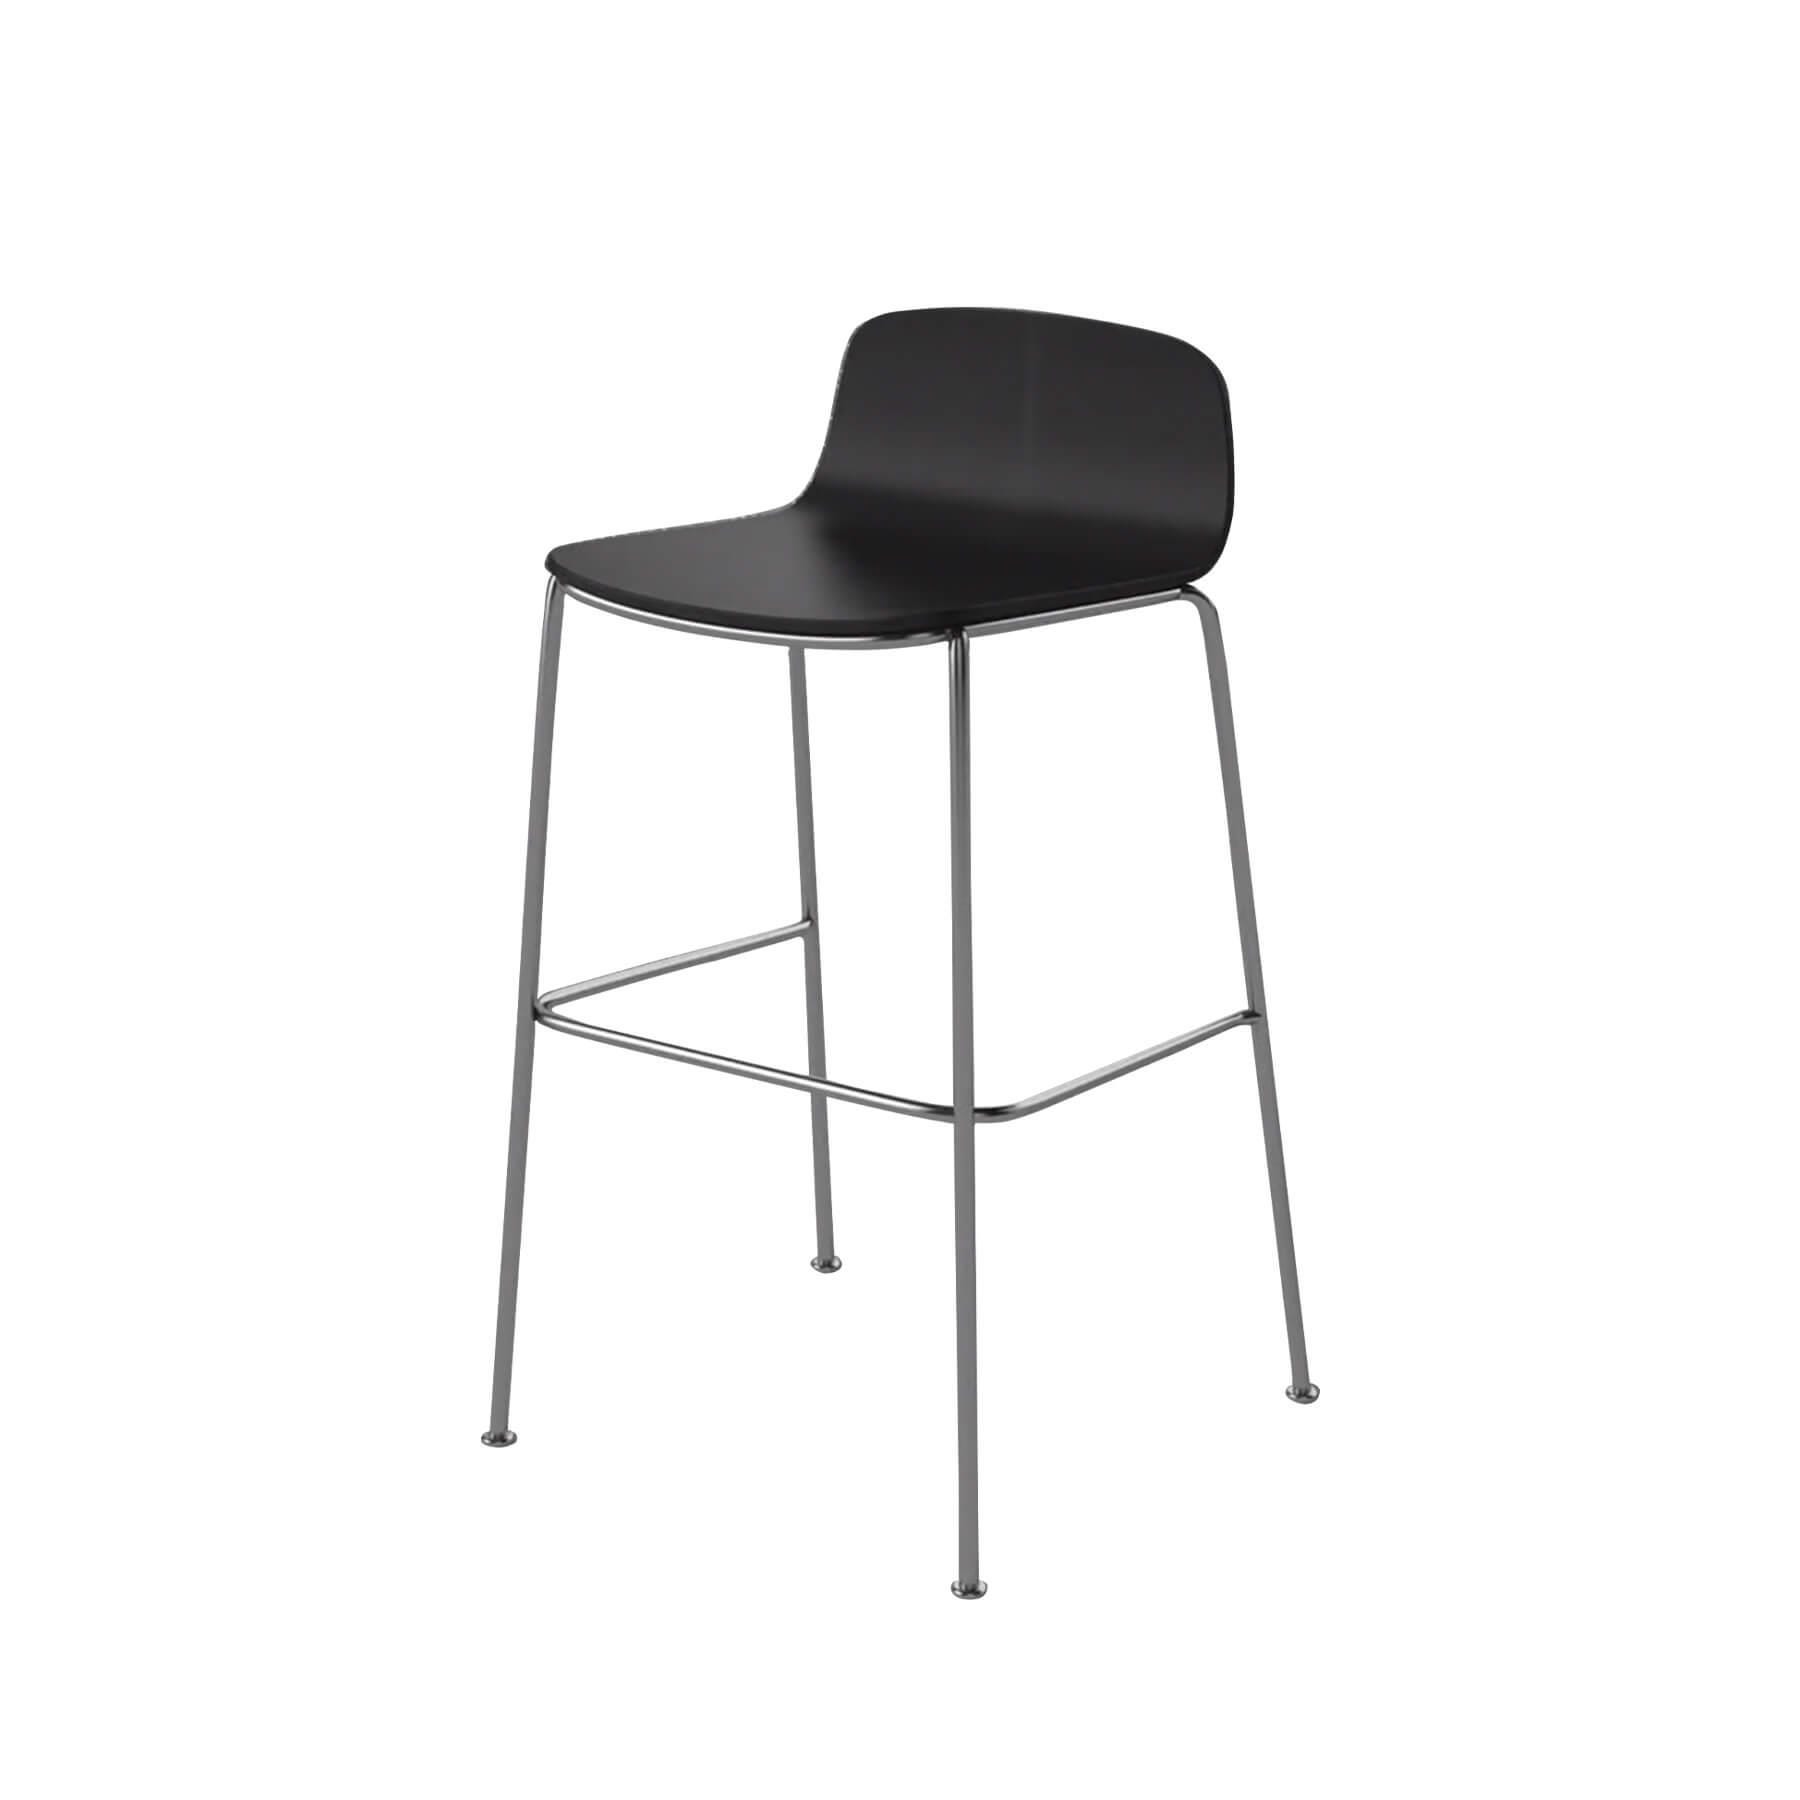 Bolia Palm Stool Kitchen Counter Stool Black Laquered Oak Chrome Plated Legs Designer Furniture From Holloways Of Ludlow